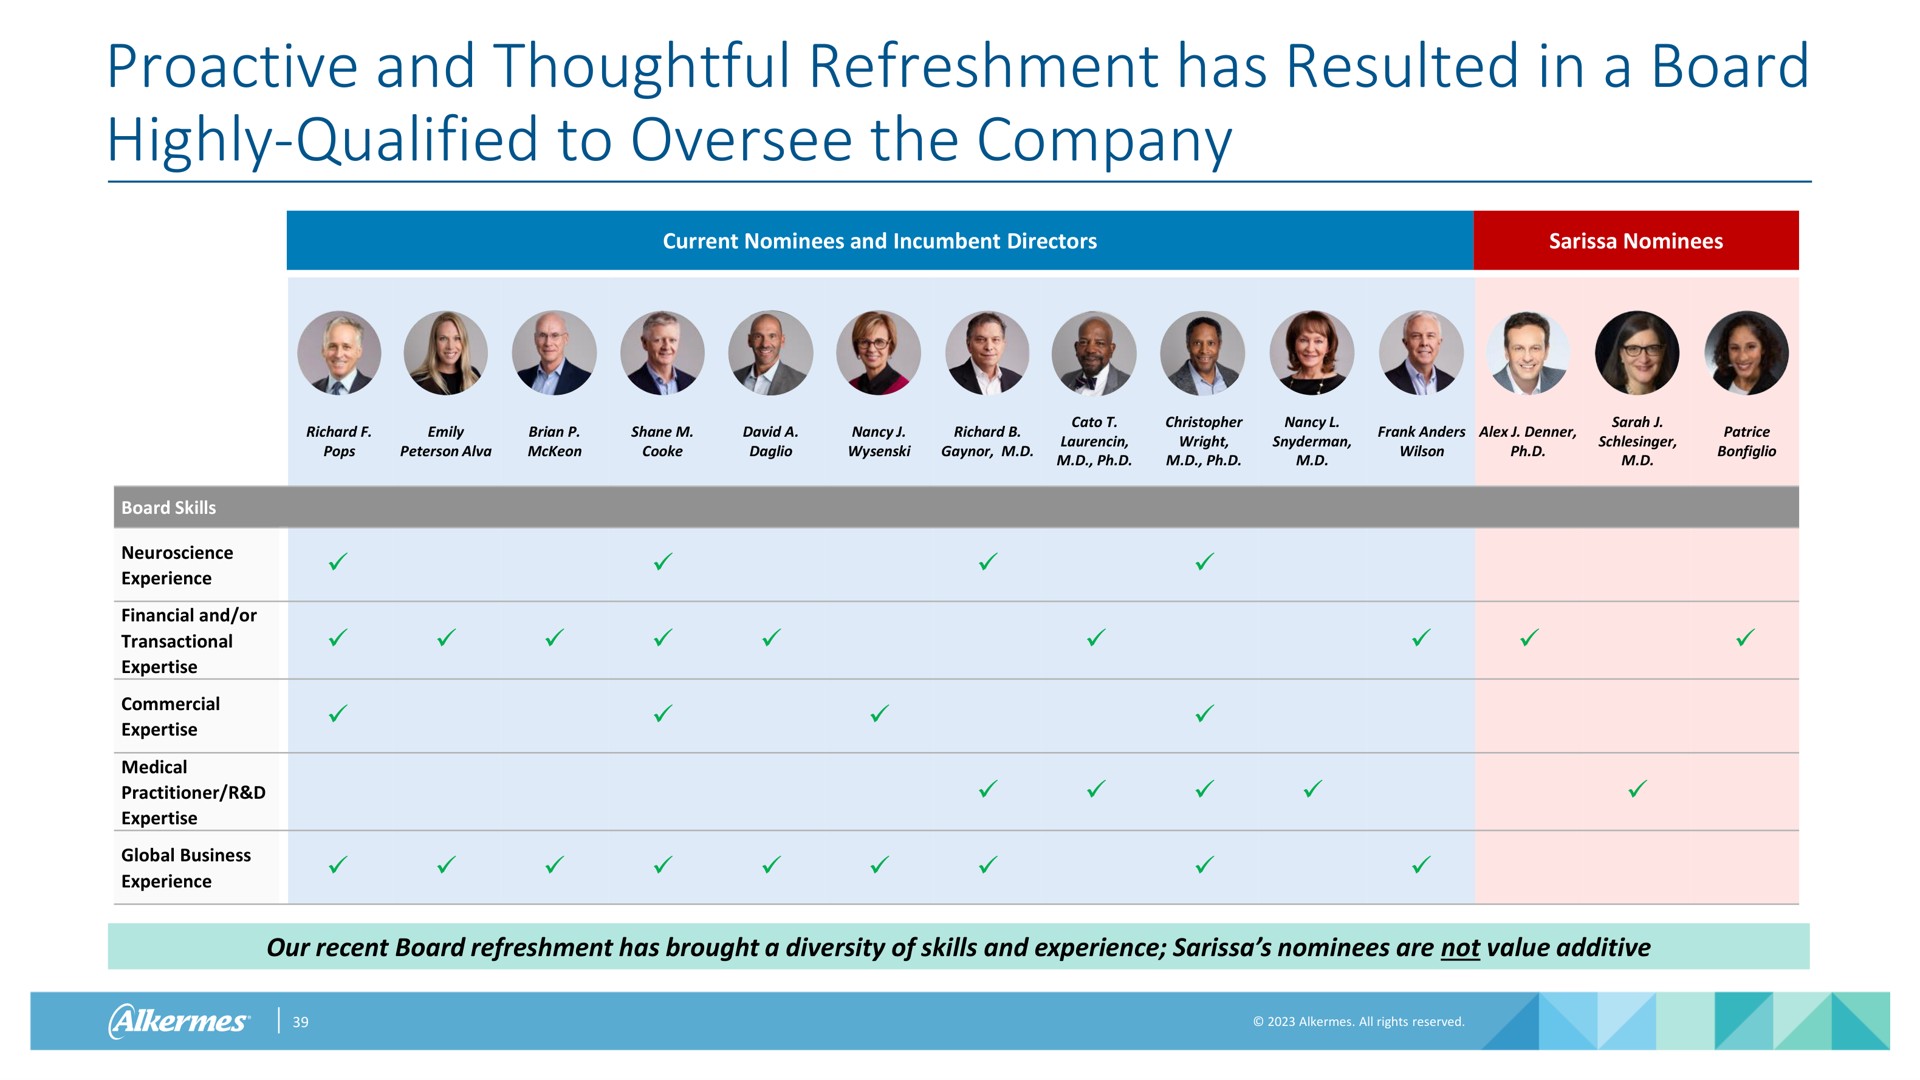 and thoughtful refreshment has resulted in a board highly qualified to oversee the company | Alkermes